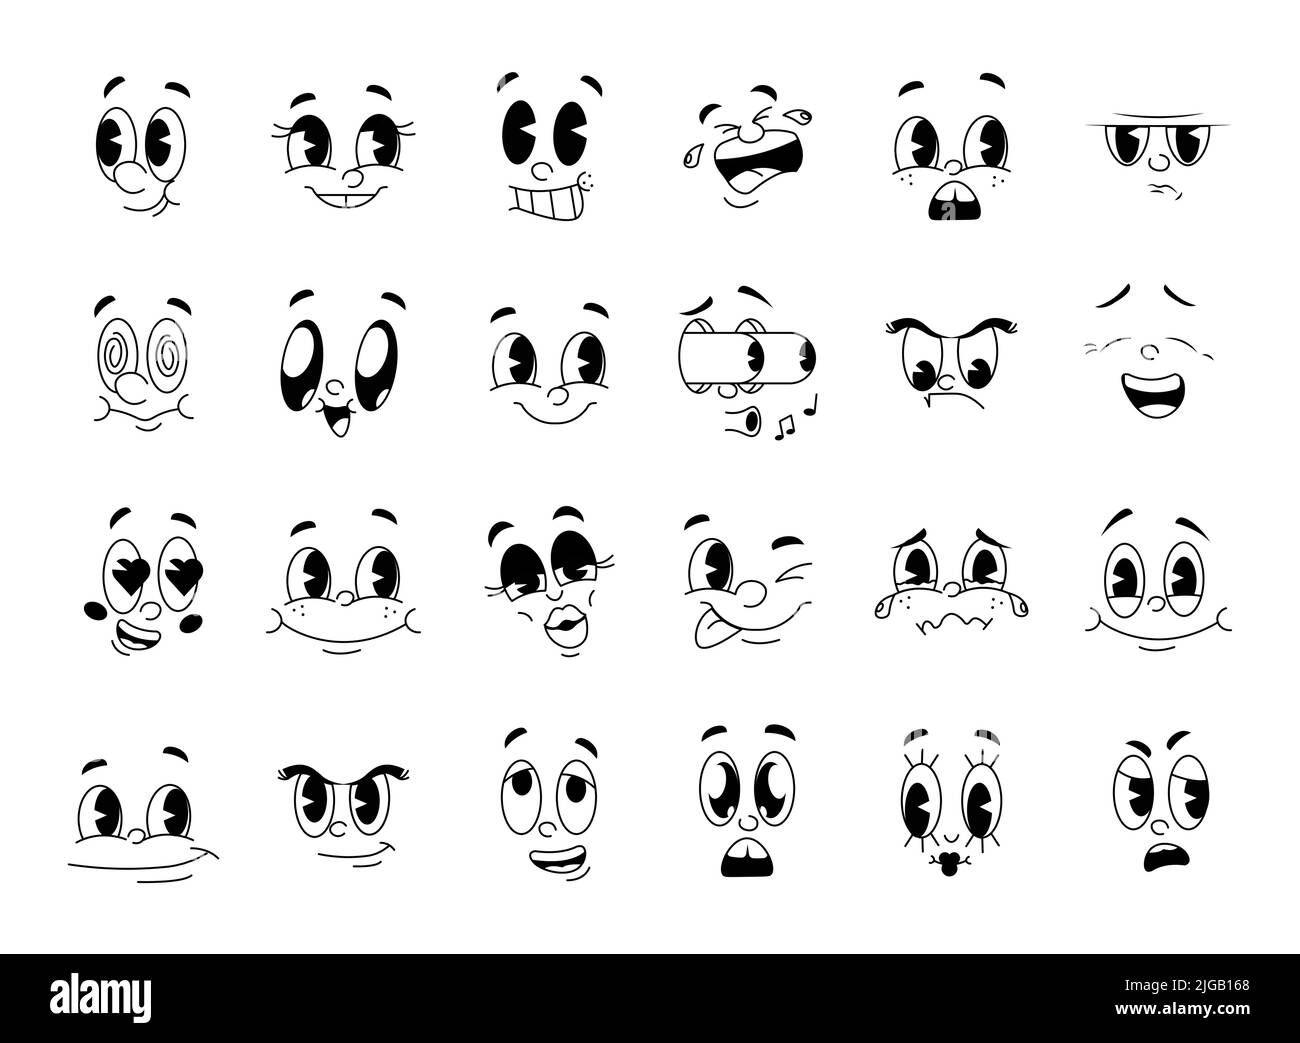 Retro cartoon and comics characters funny faces vector set. 30s, 50s, 60s old animation eyes and mouths elements. Vintage comic style faces for logo. Emoticon with different happy and sad emotions. Stock Vector